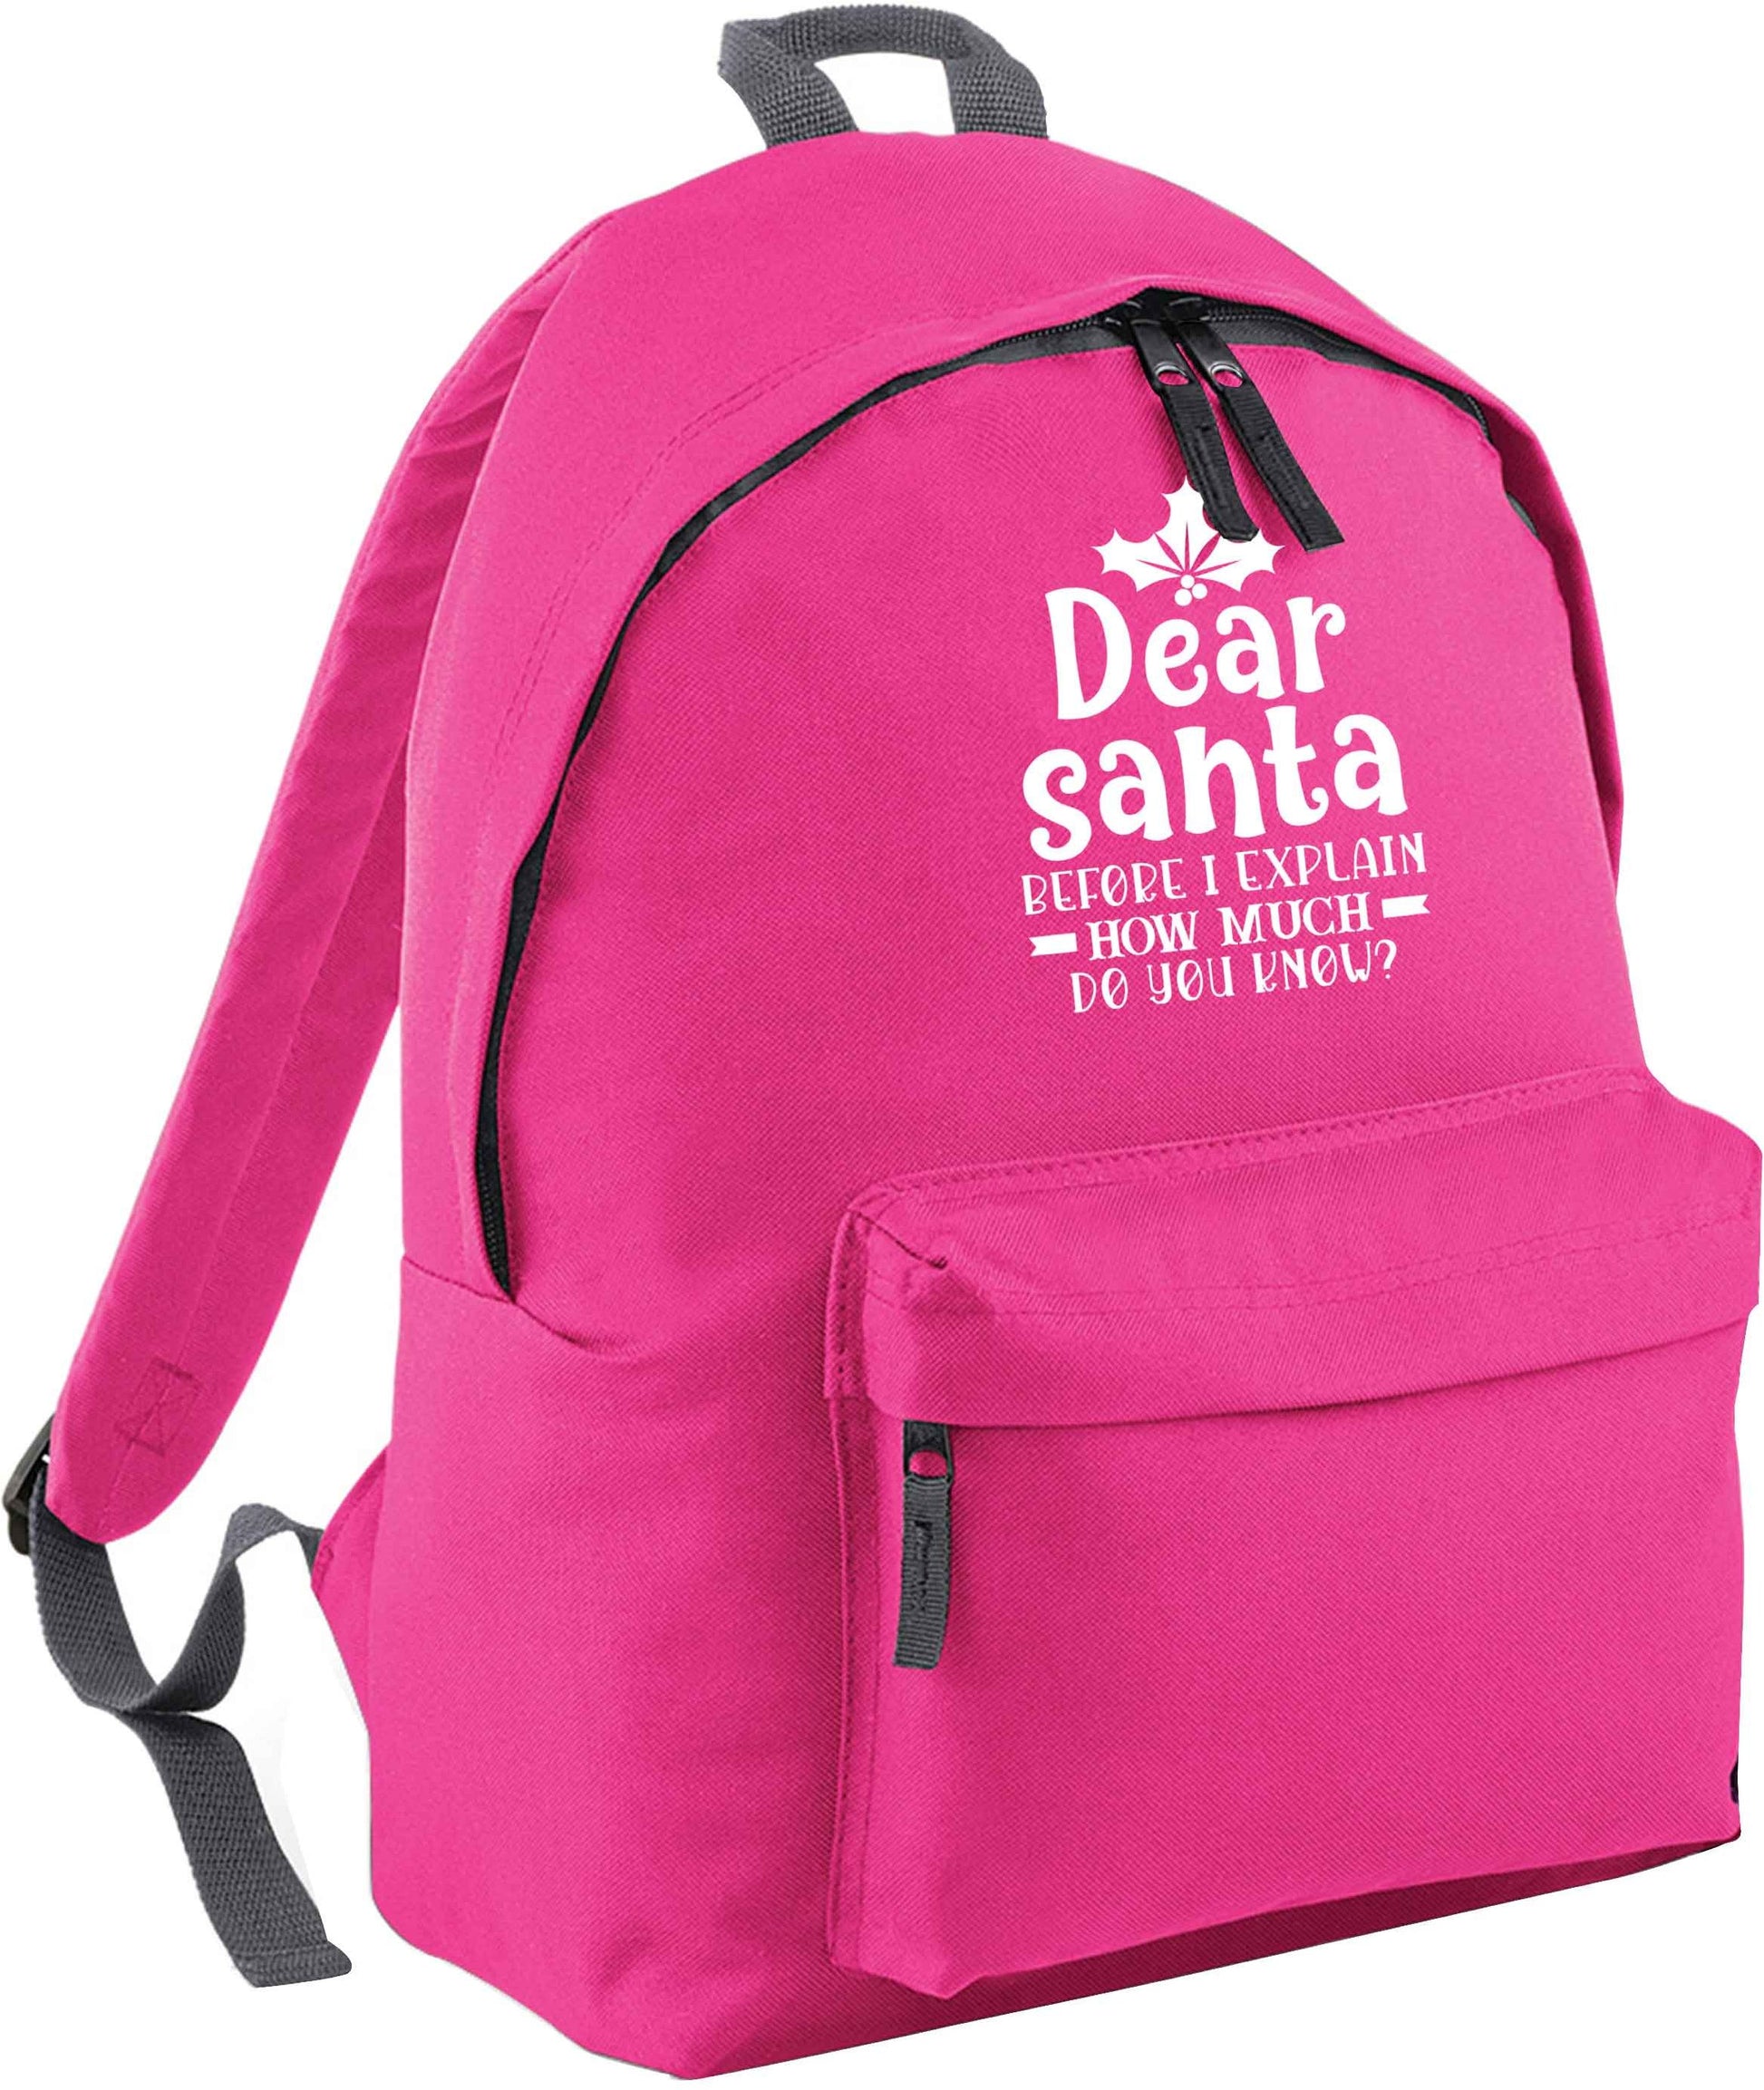 Santa before I explain how much do you know? pink adults backpack